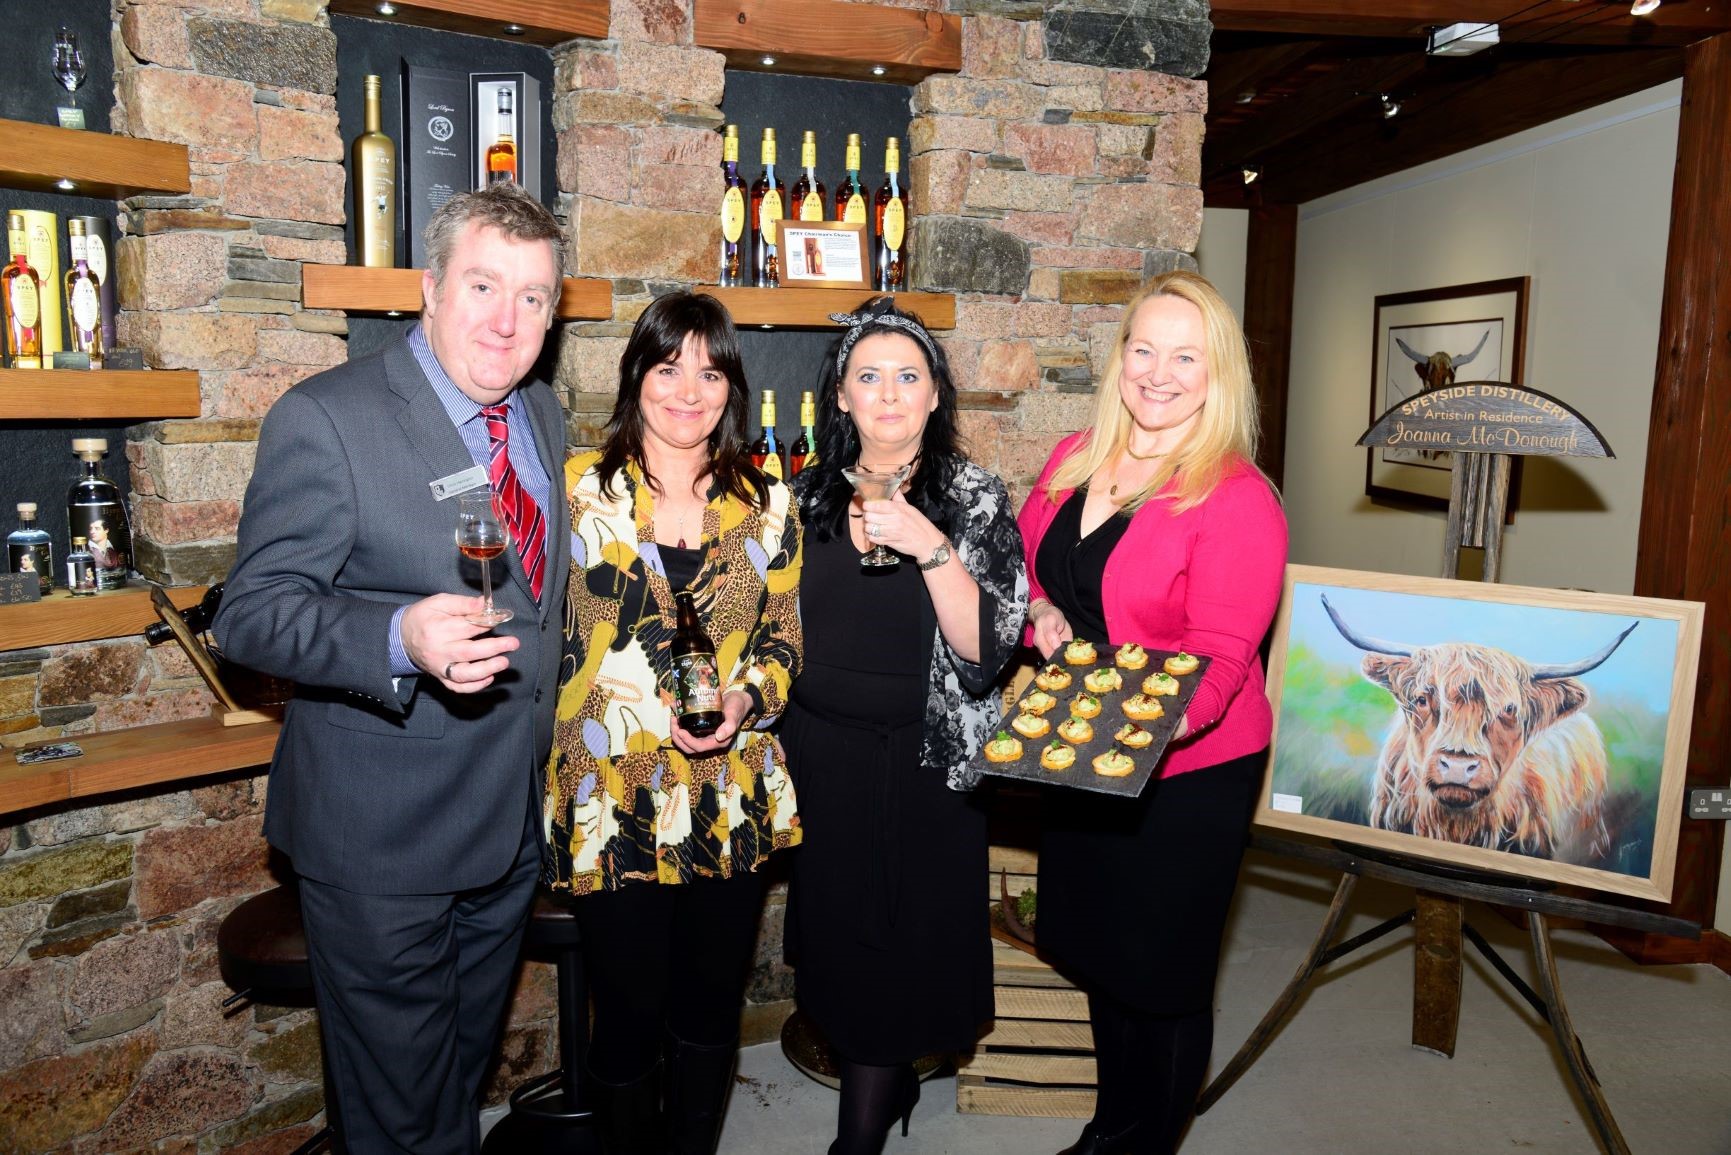 Christopher Harrington of Macdonald Aviemore Hotel; Samantha Faircliff of Cairngorm Brewery and Patricia Dillon and Susan Libeks of Speyside Distillery celebrating the launch of the Aviemore Big Mix Festival